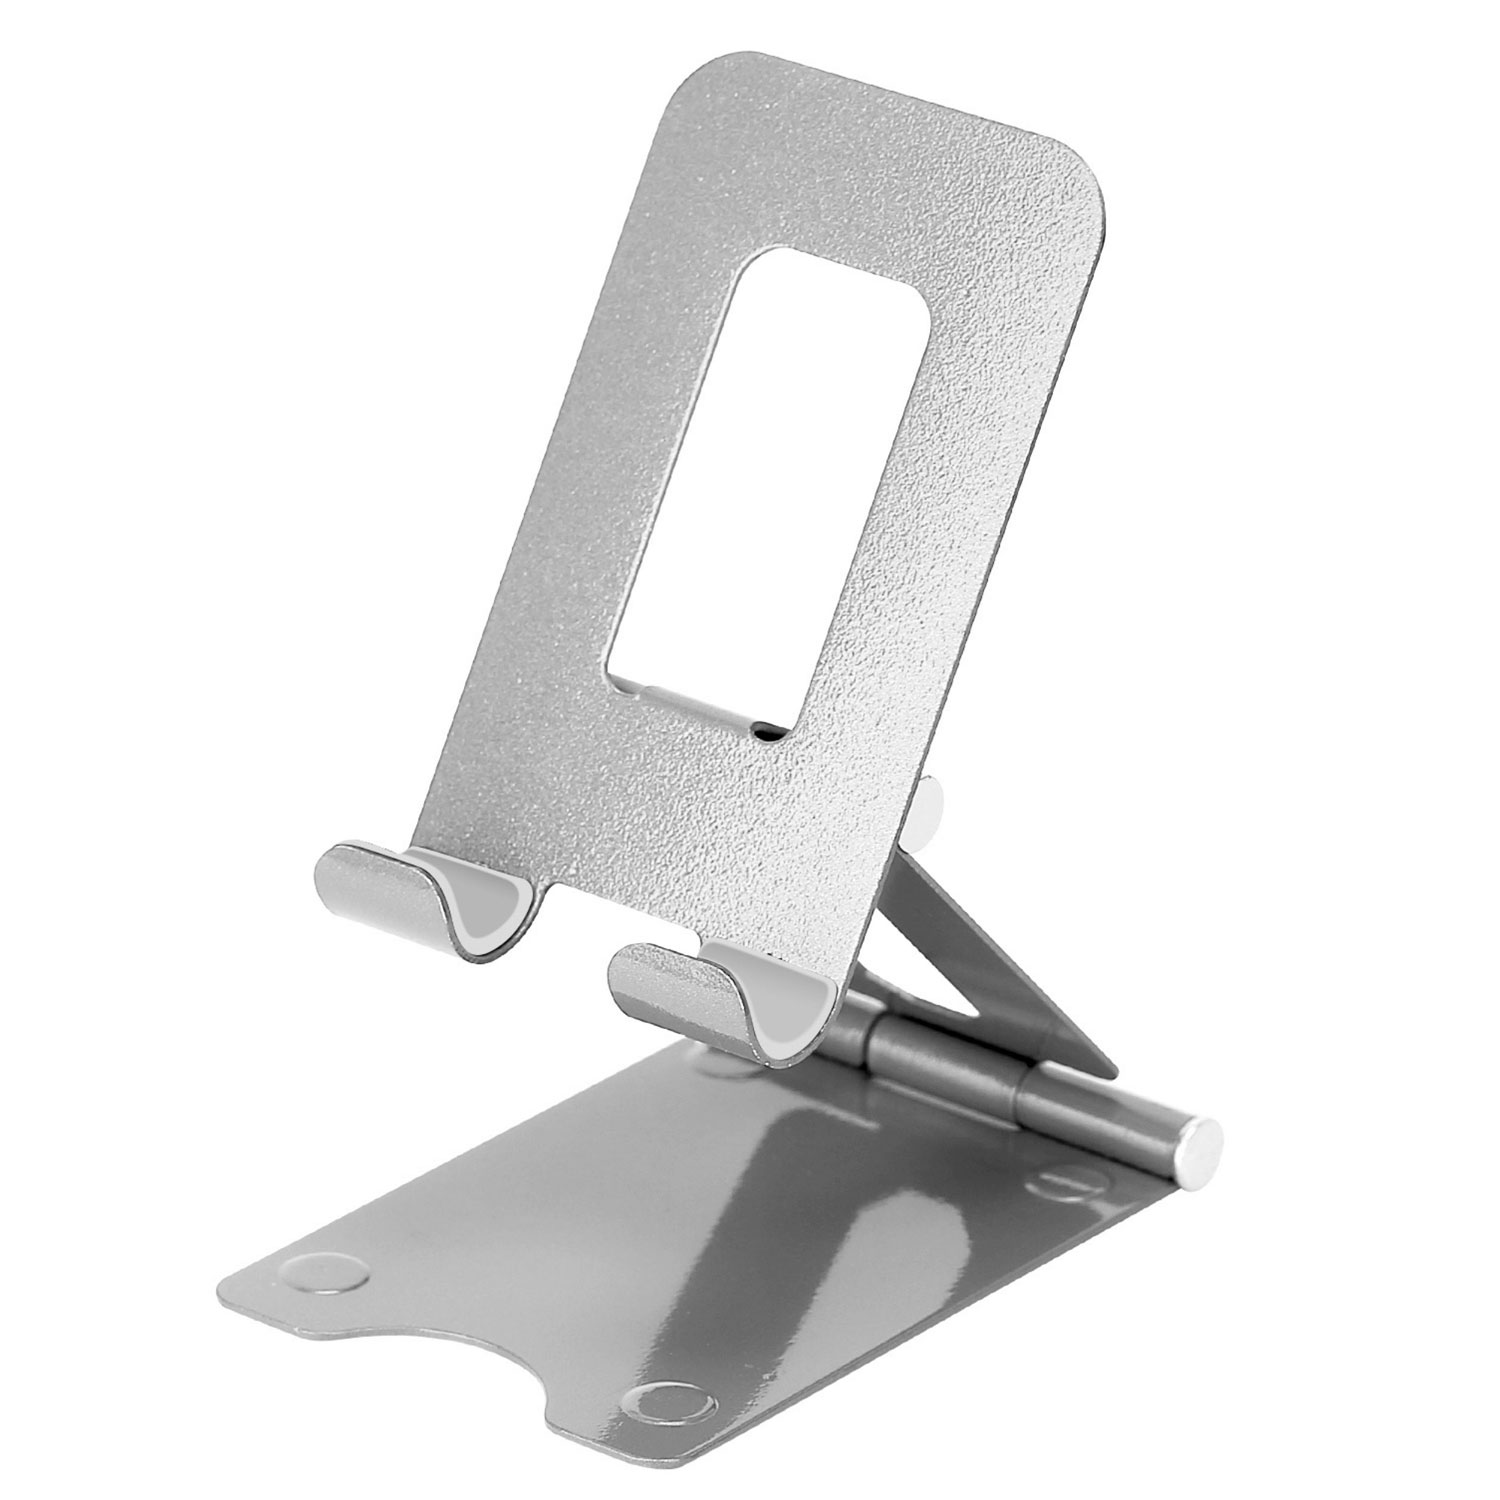 Adjustable Foldable Desktop Phone Stand for 4-10in Devices